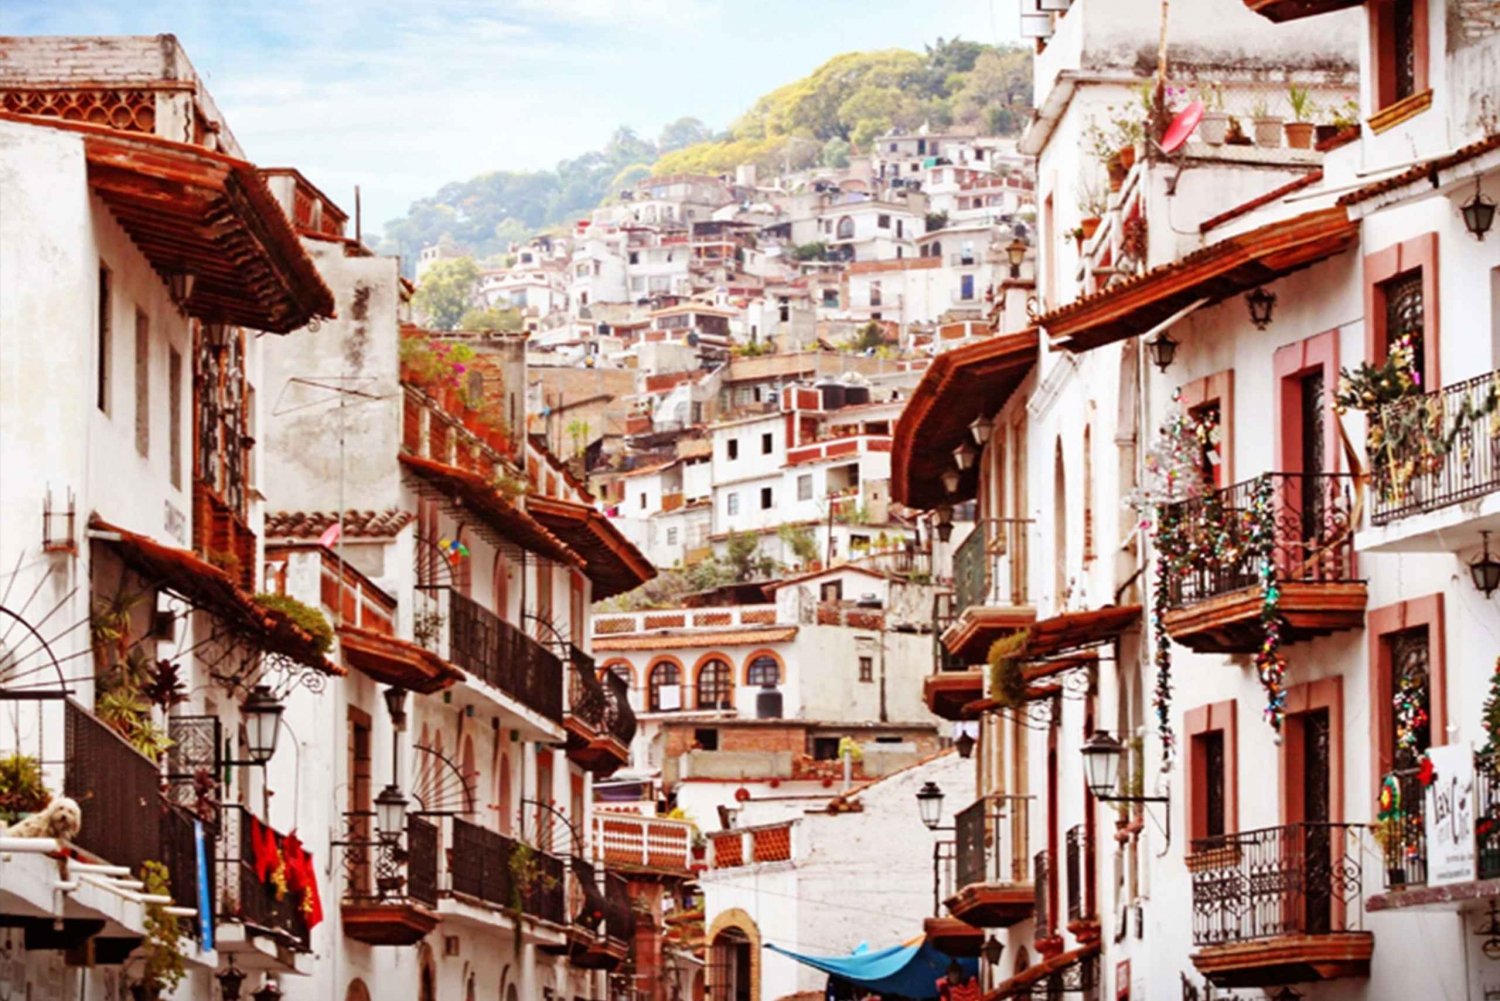 From Mexico City: Taxco and Cuernavaca History Tour